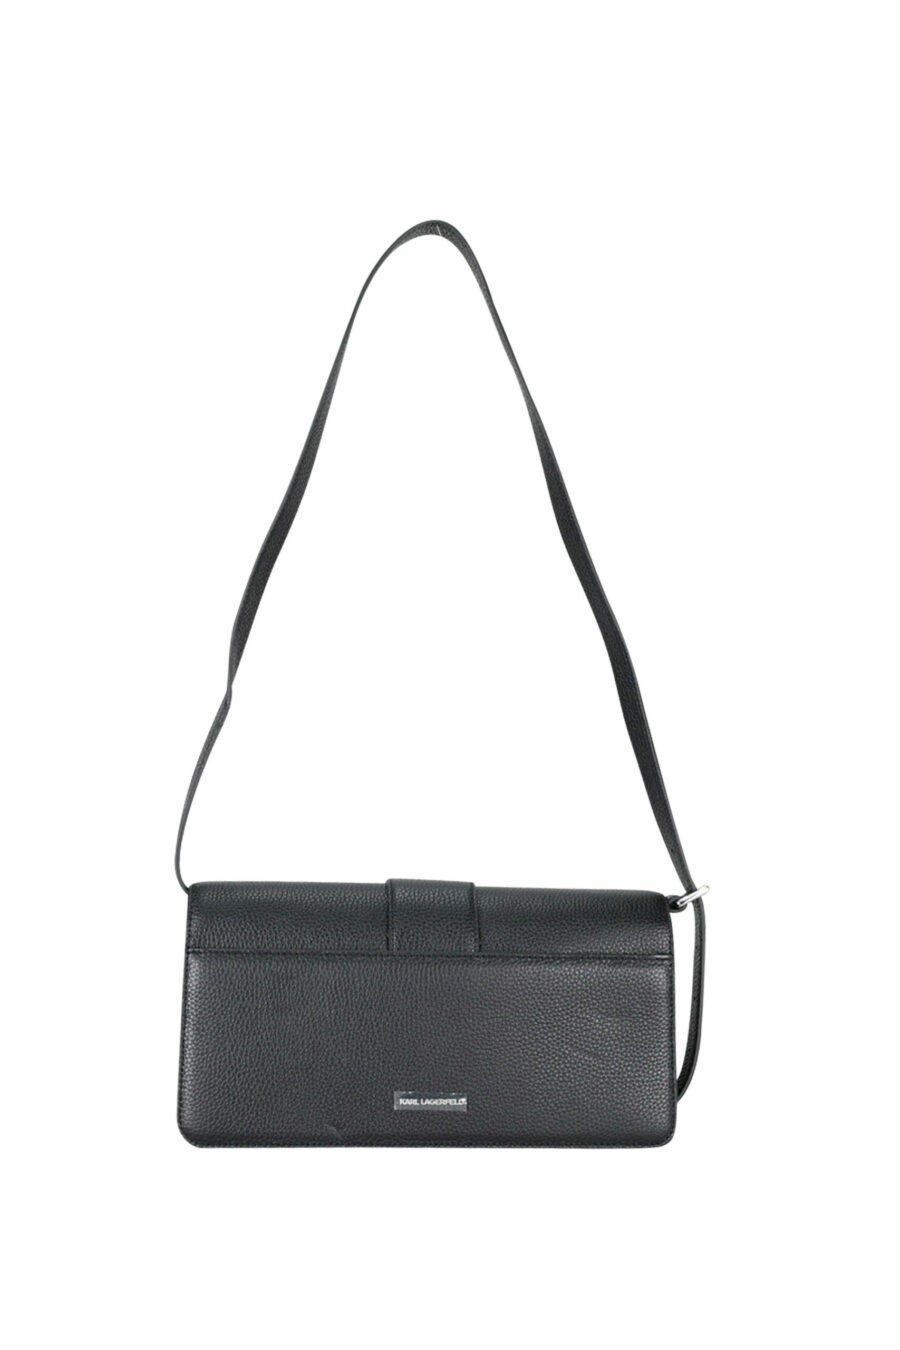 Small shoulder bag with maxilogo "karl" on flap - 8720744416531 2 scaled